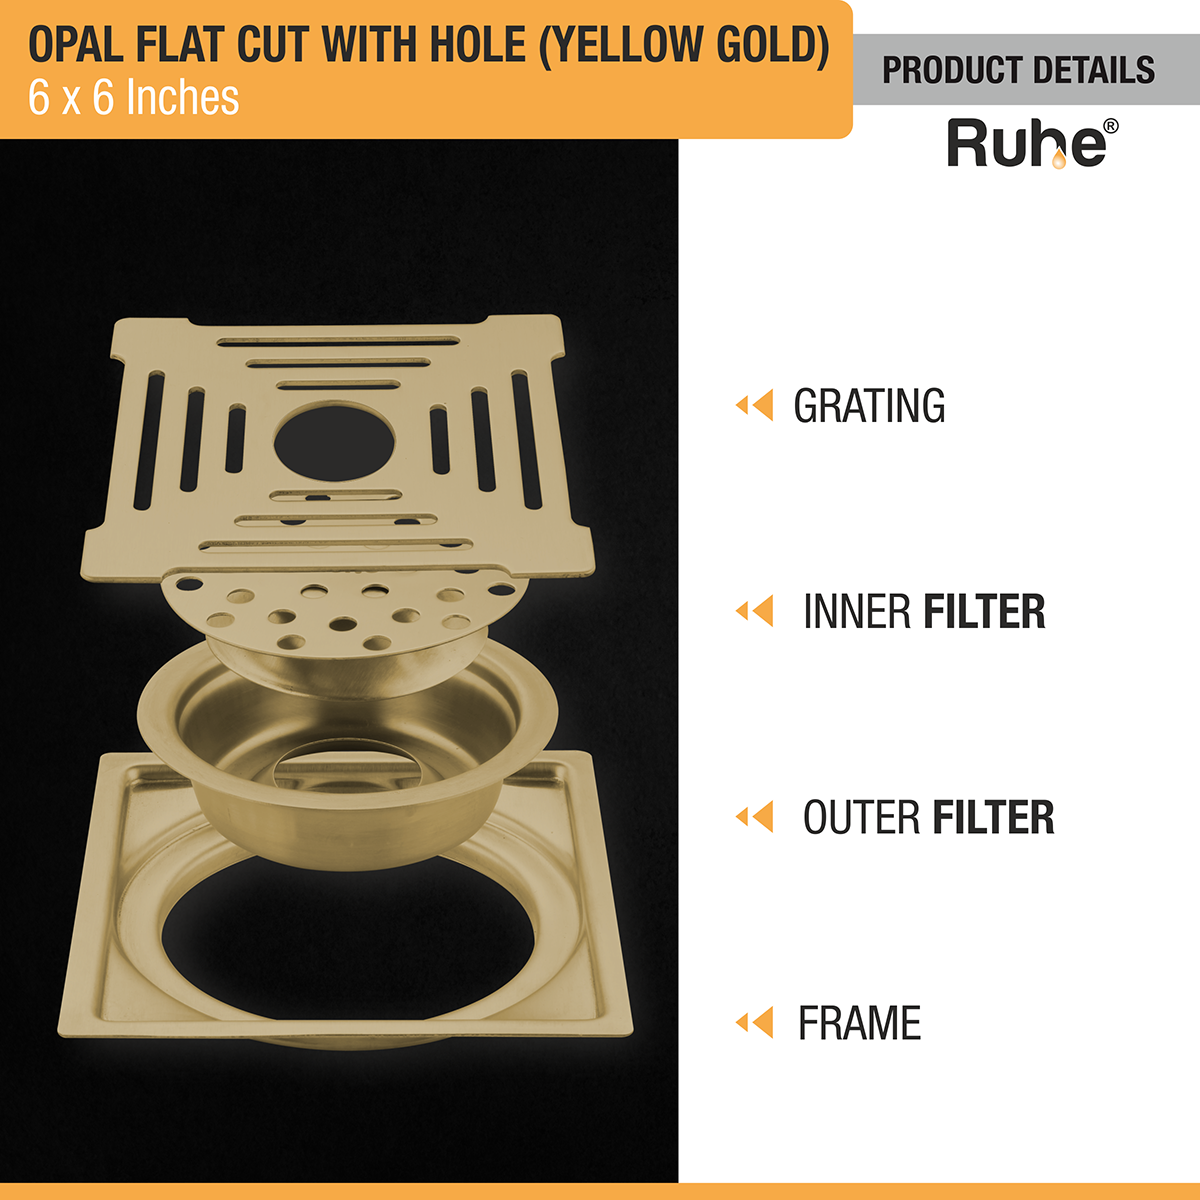 Opal Square Flat Cut Floor Drain in Yellow Gold PVD Coating (6 x 6 Inches) with Hole product details